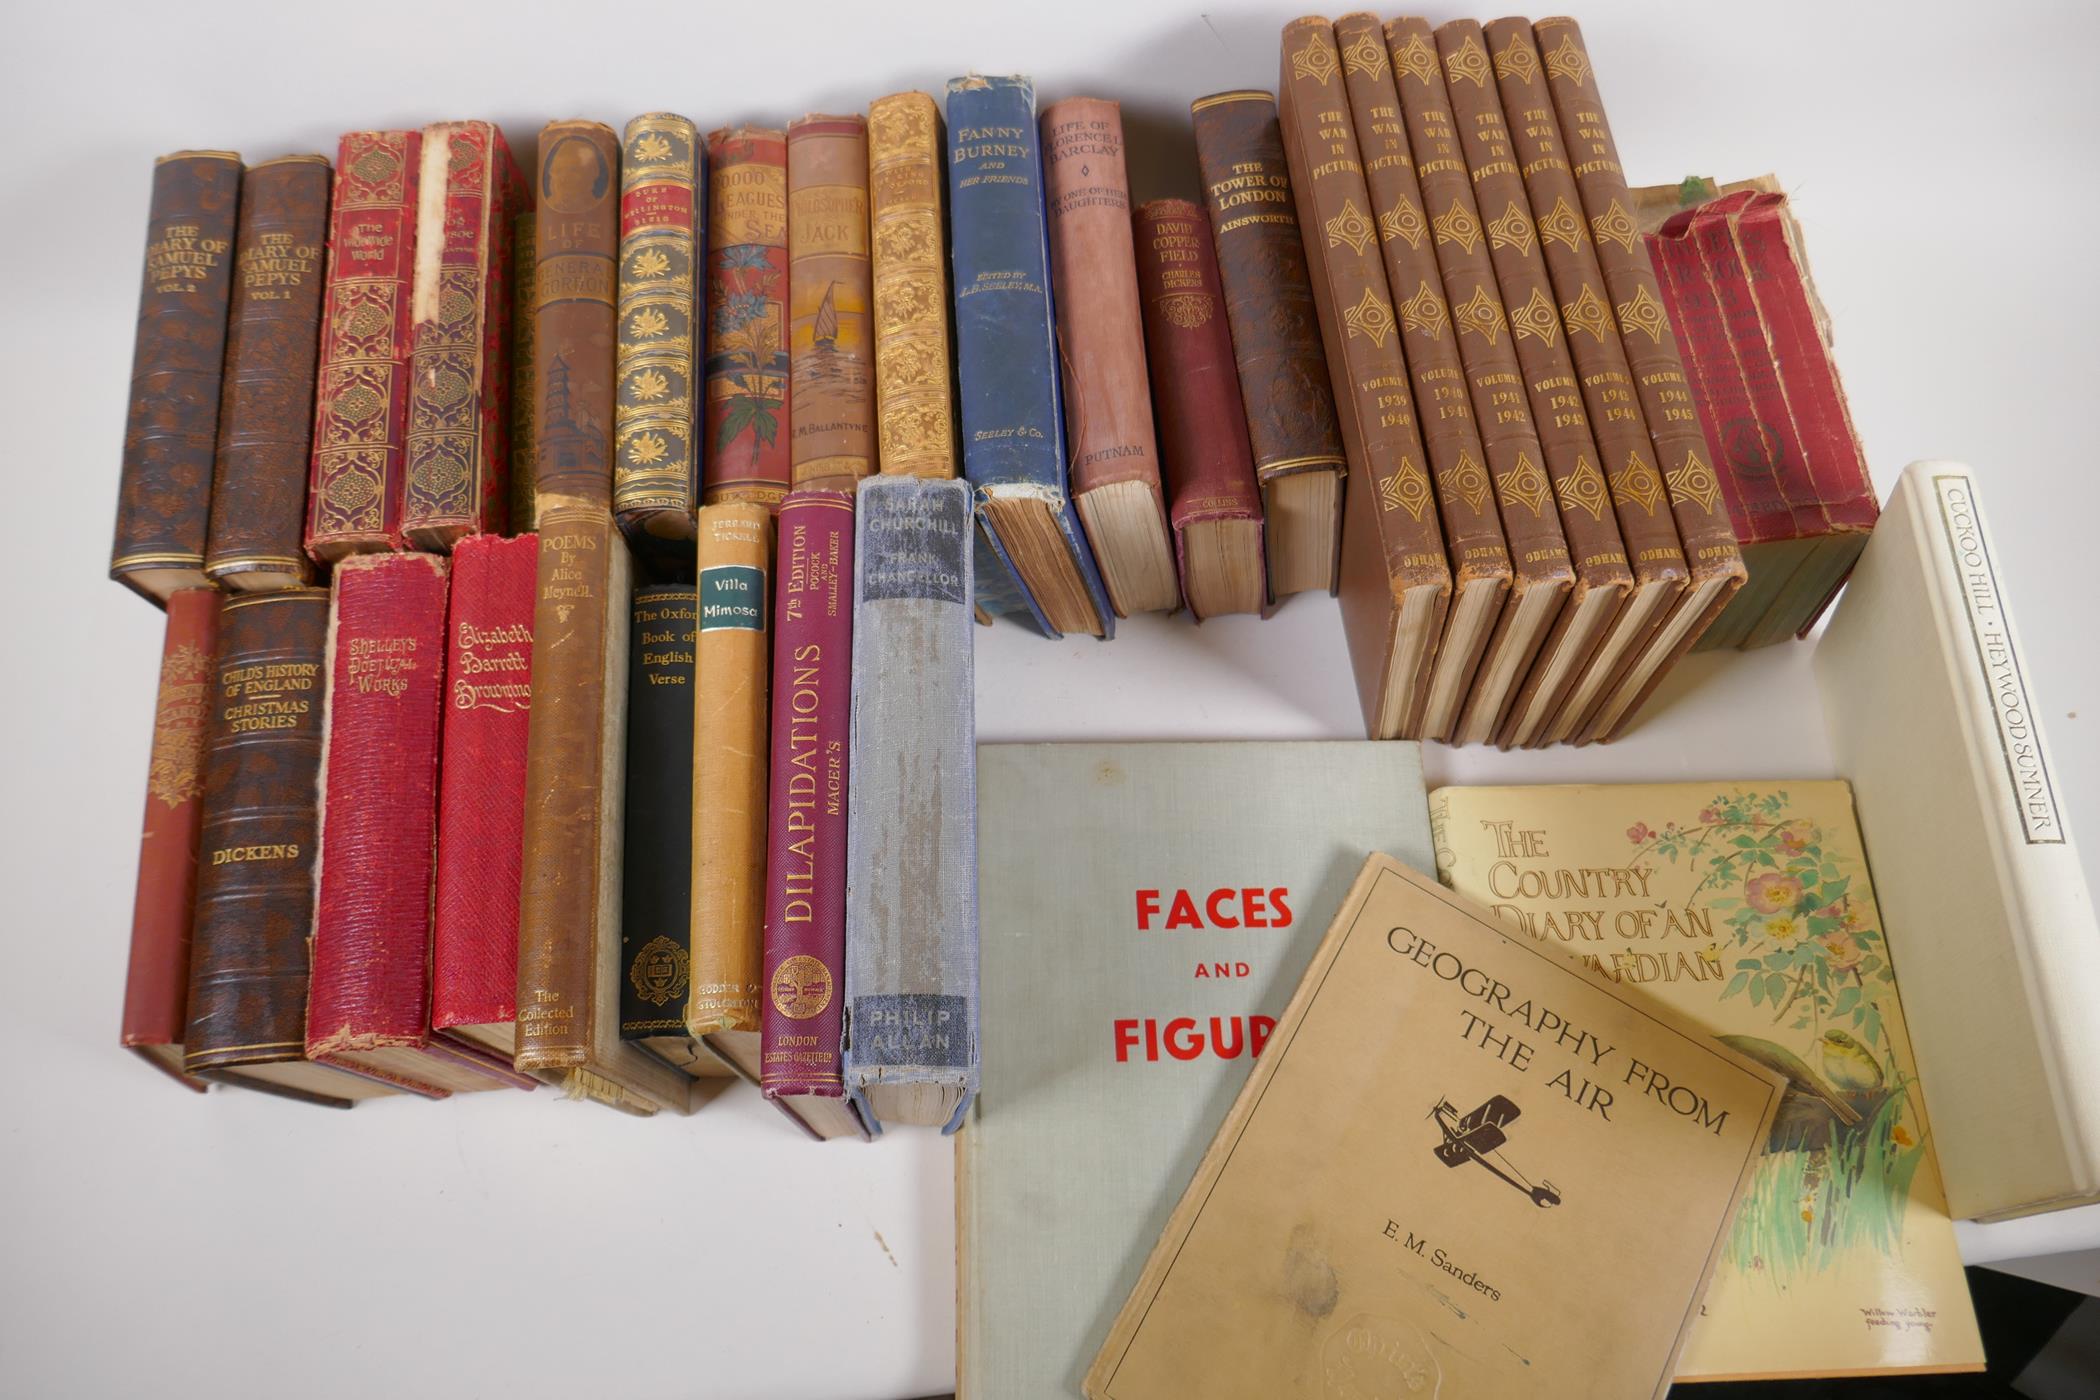 A quantity of vintage books including six volumes The War in Pictures by Odhams, etc